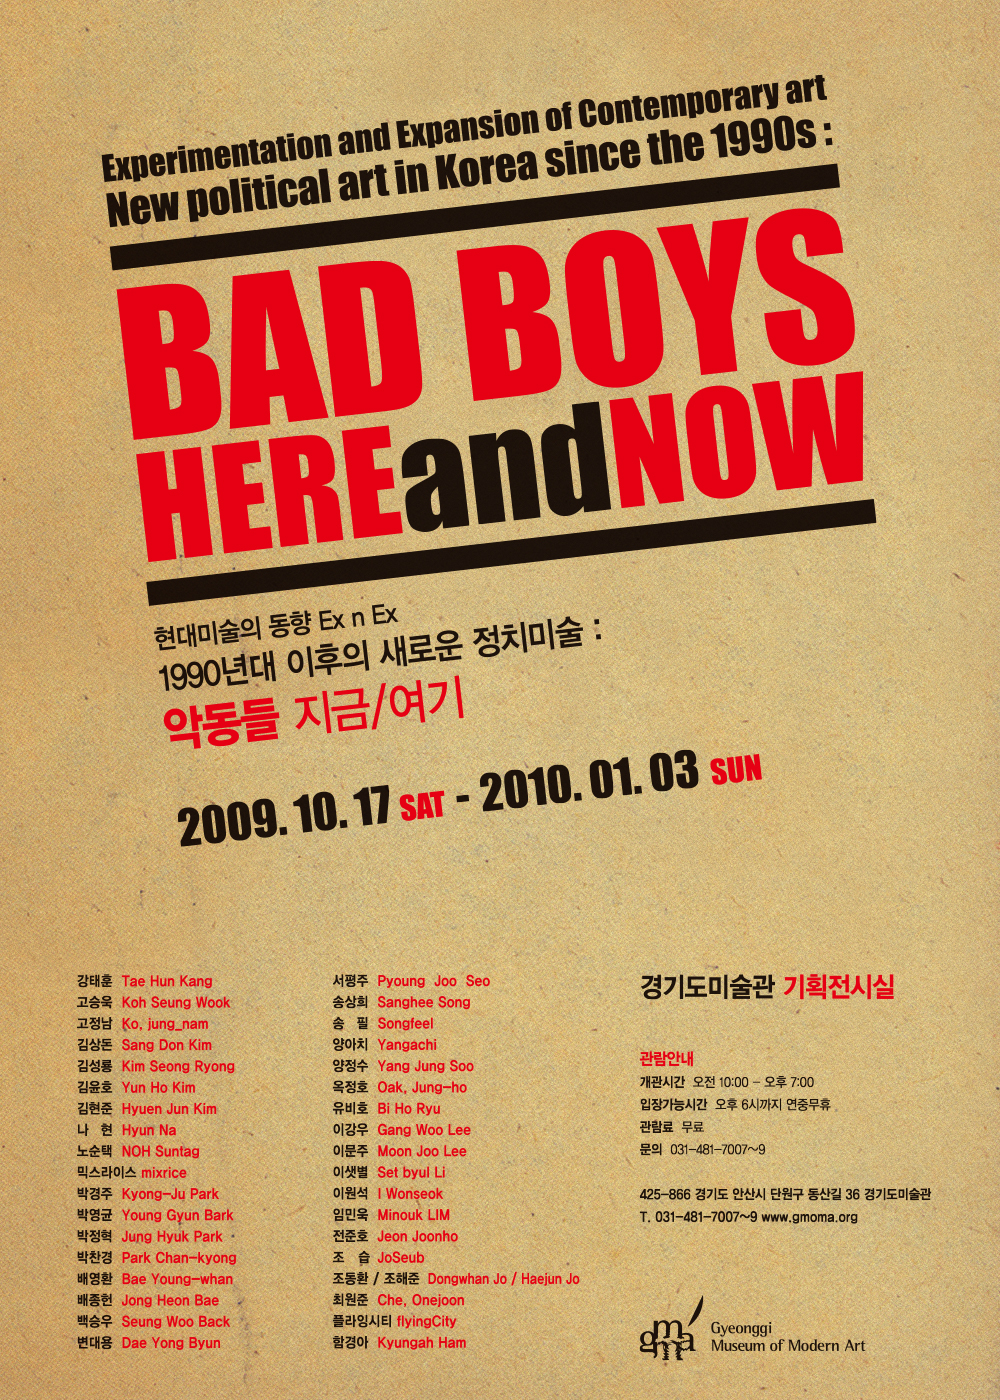 Bad Boys Here and Now